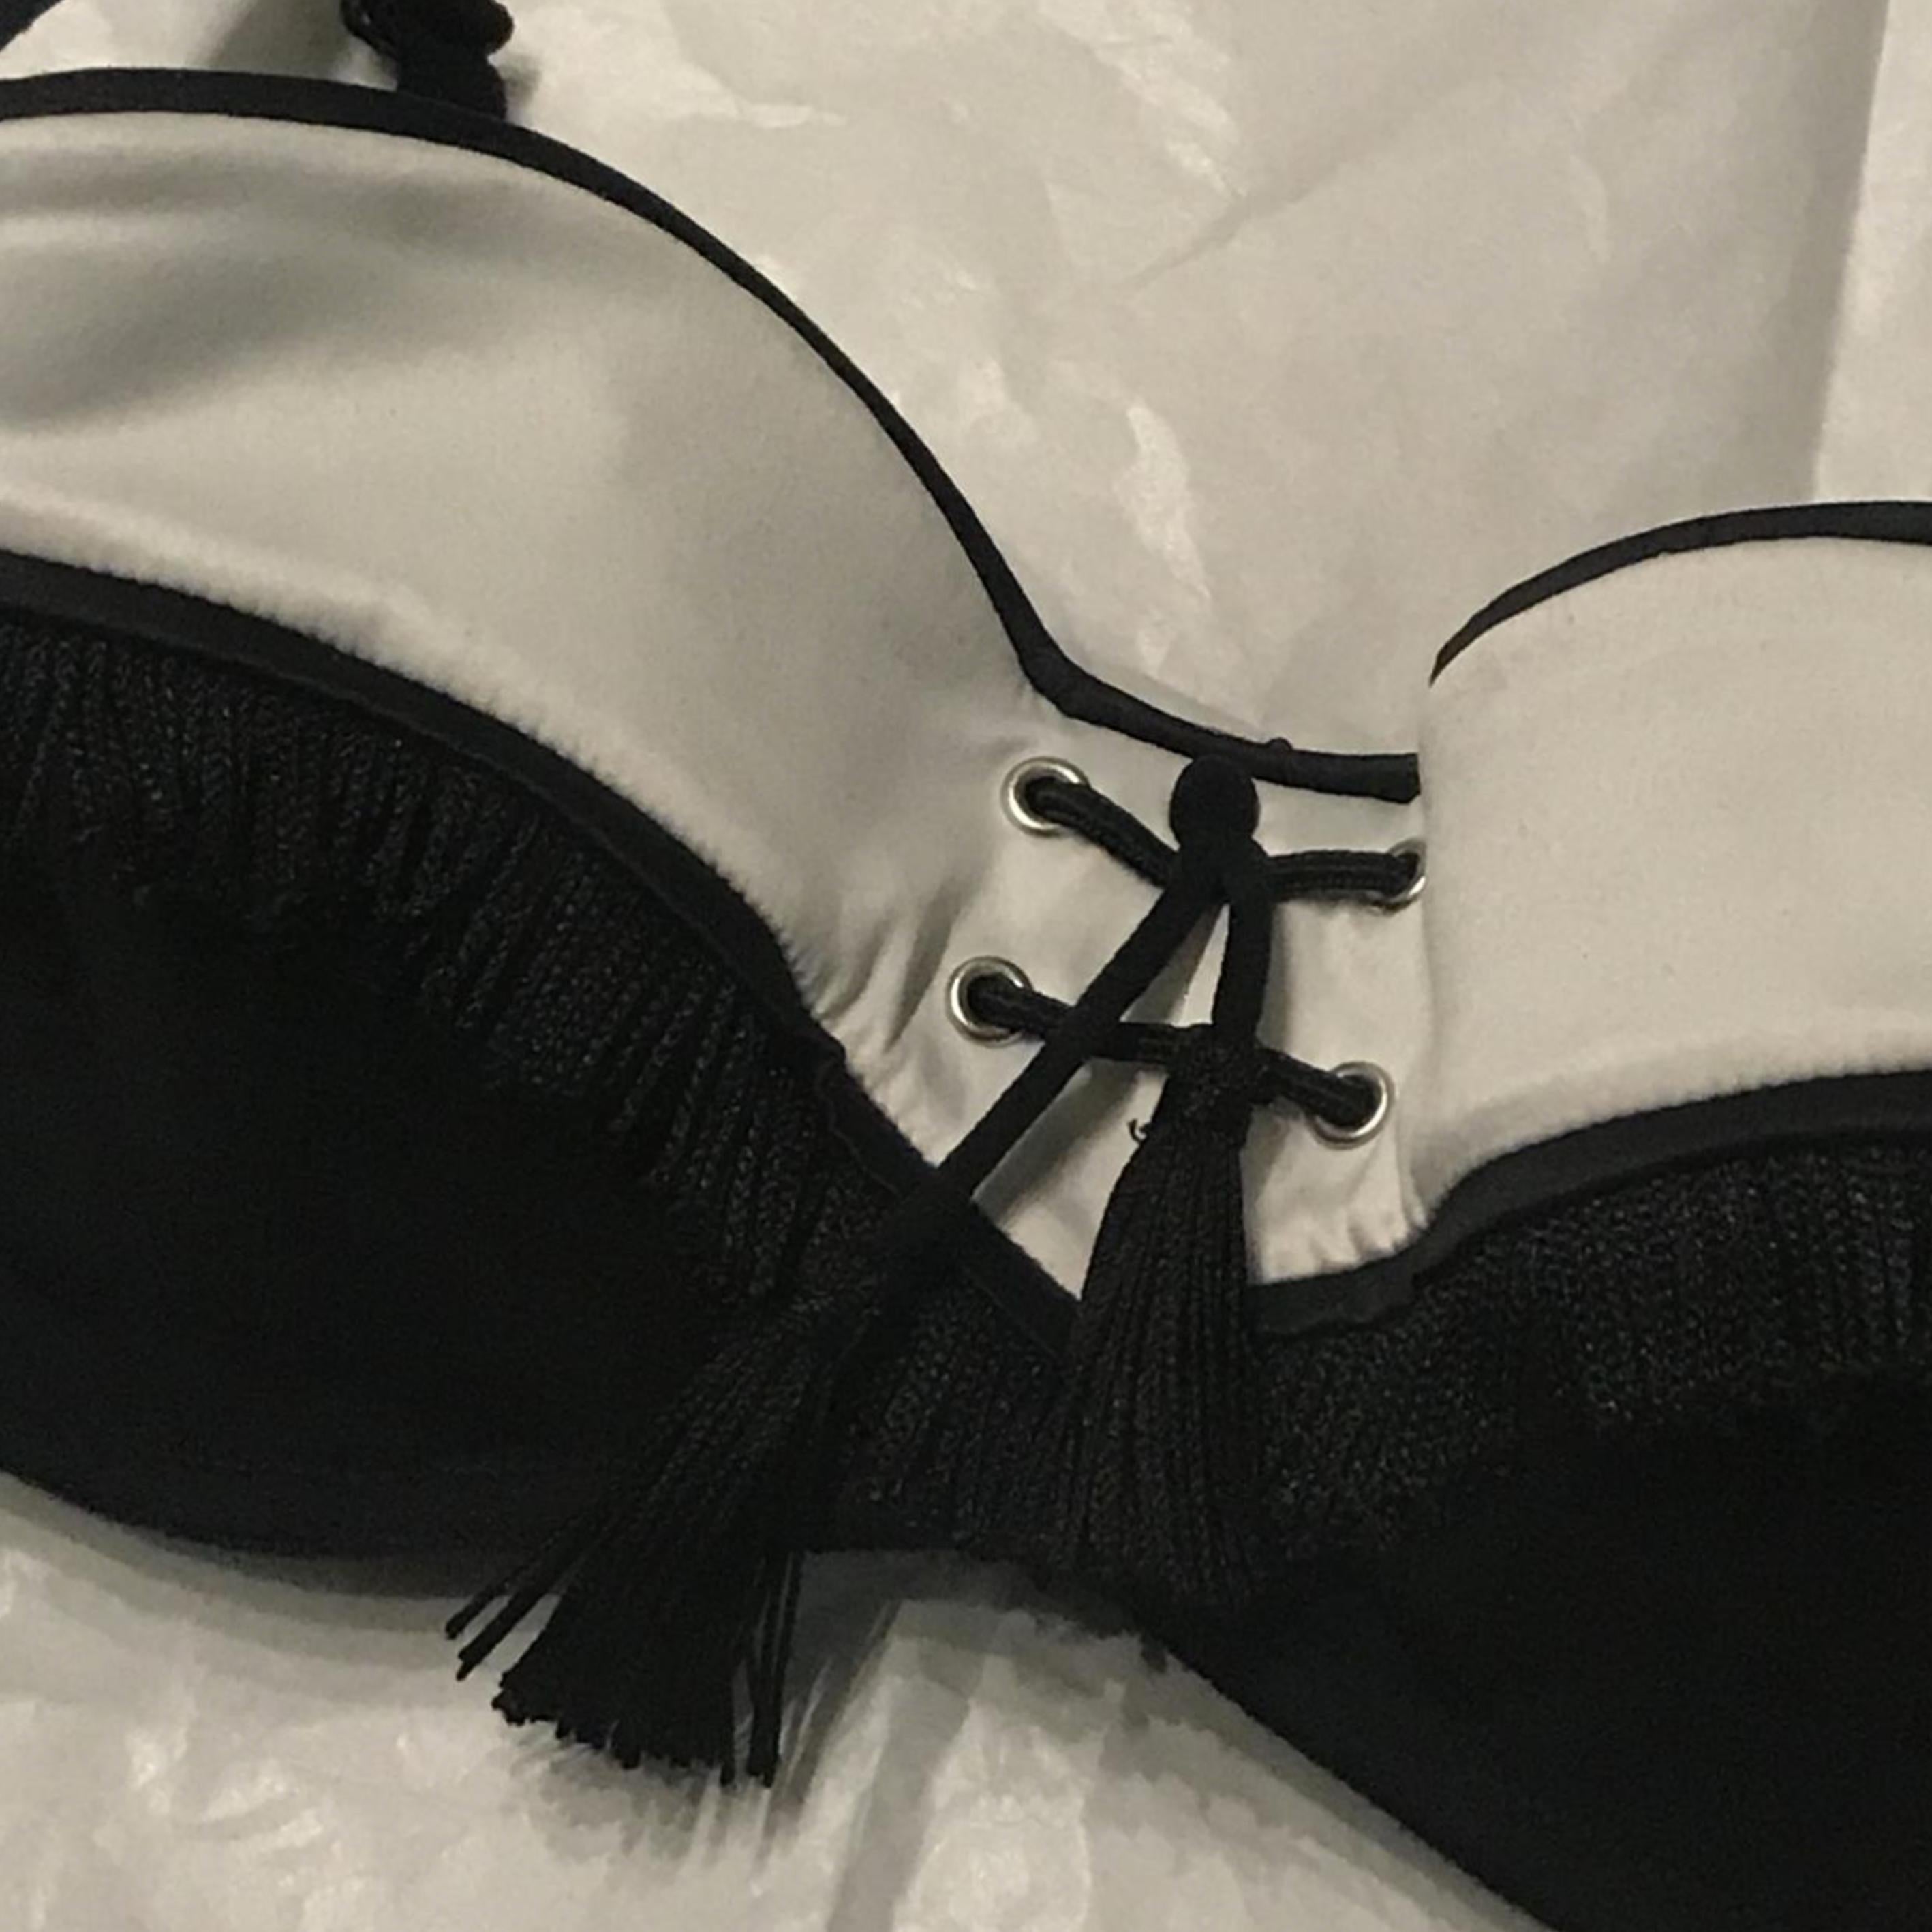 CHANTAL THOMASS Bra Black and white with fringes

Tag THOMASS

Size 70B EUR/ 32B INT/ 85B FR

Polyester/ Nylon

Perfect condition

Shipping worldwide with tracking number